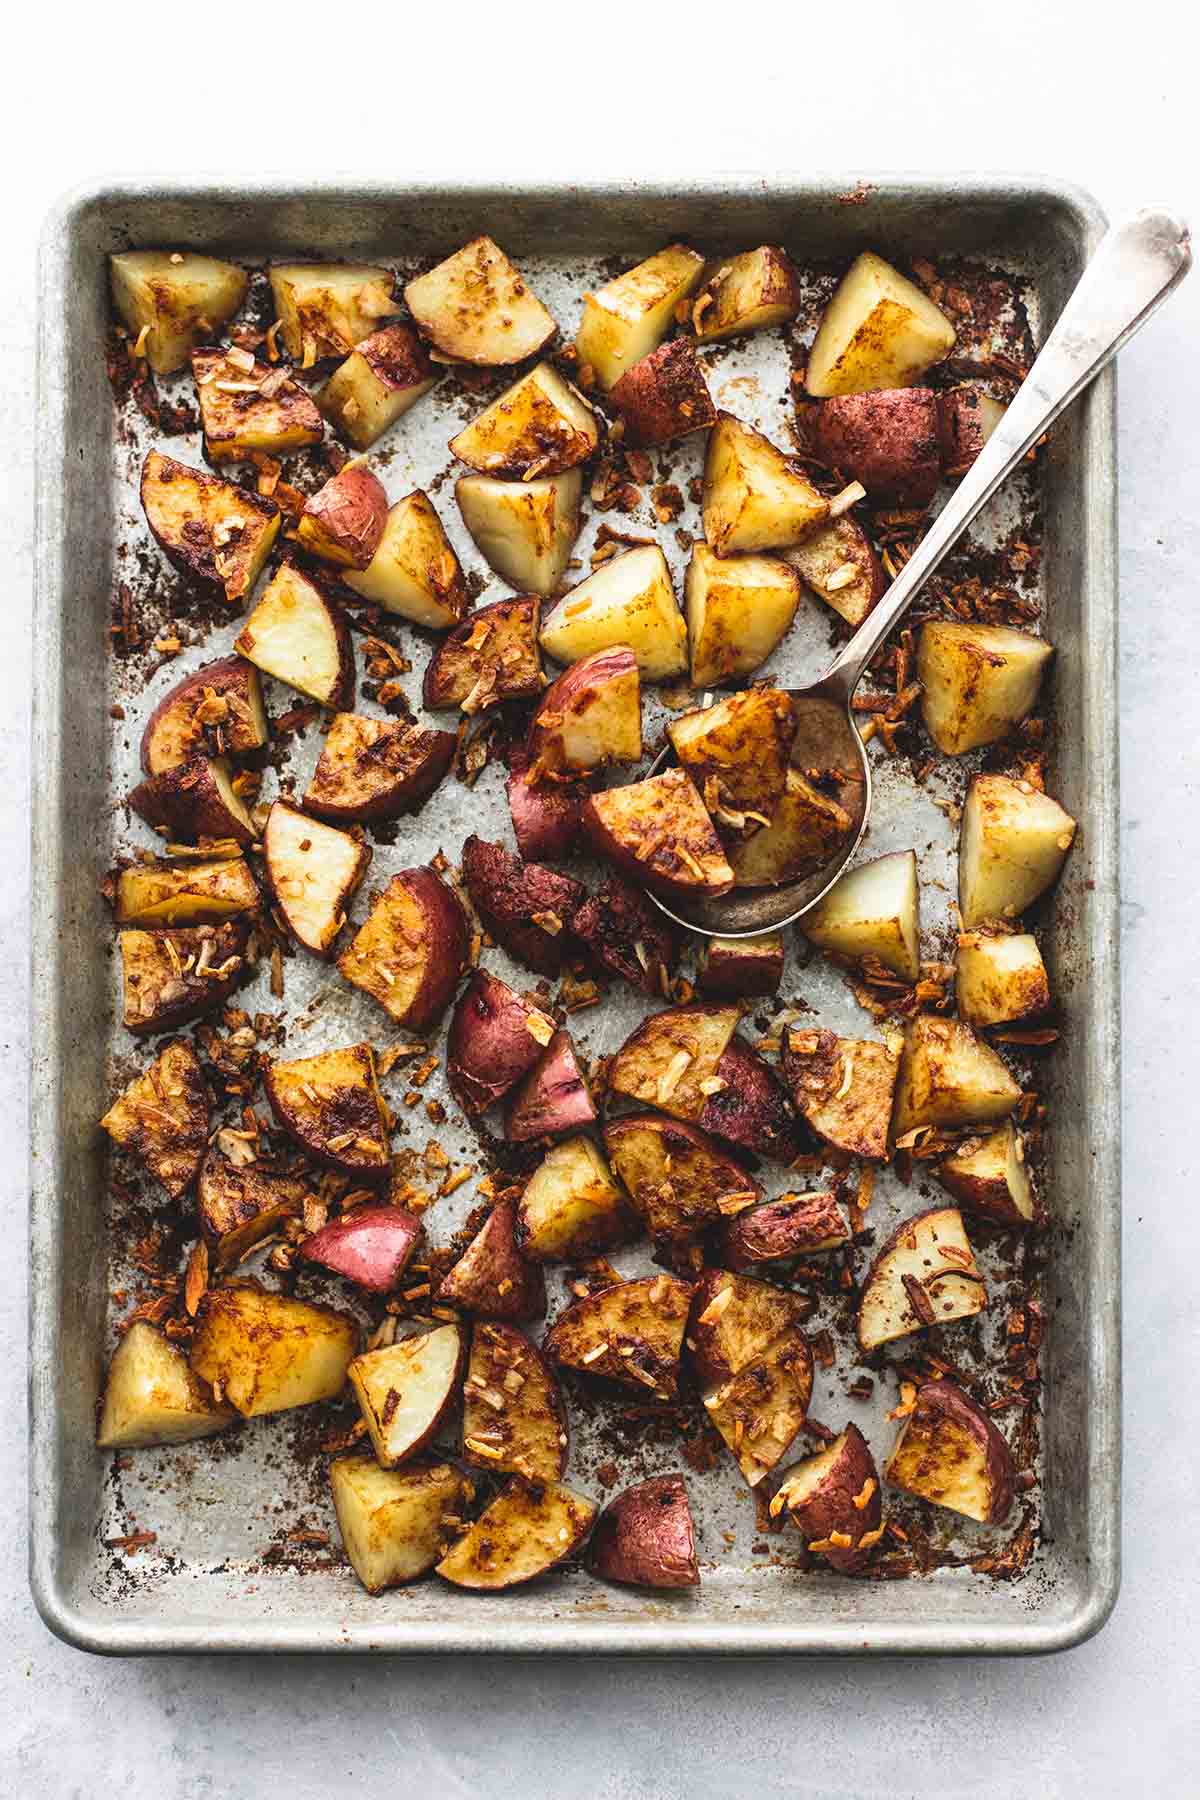 top view of oven roasted potatoes with a spoon on a baking sheet.